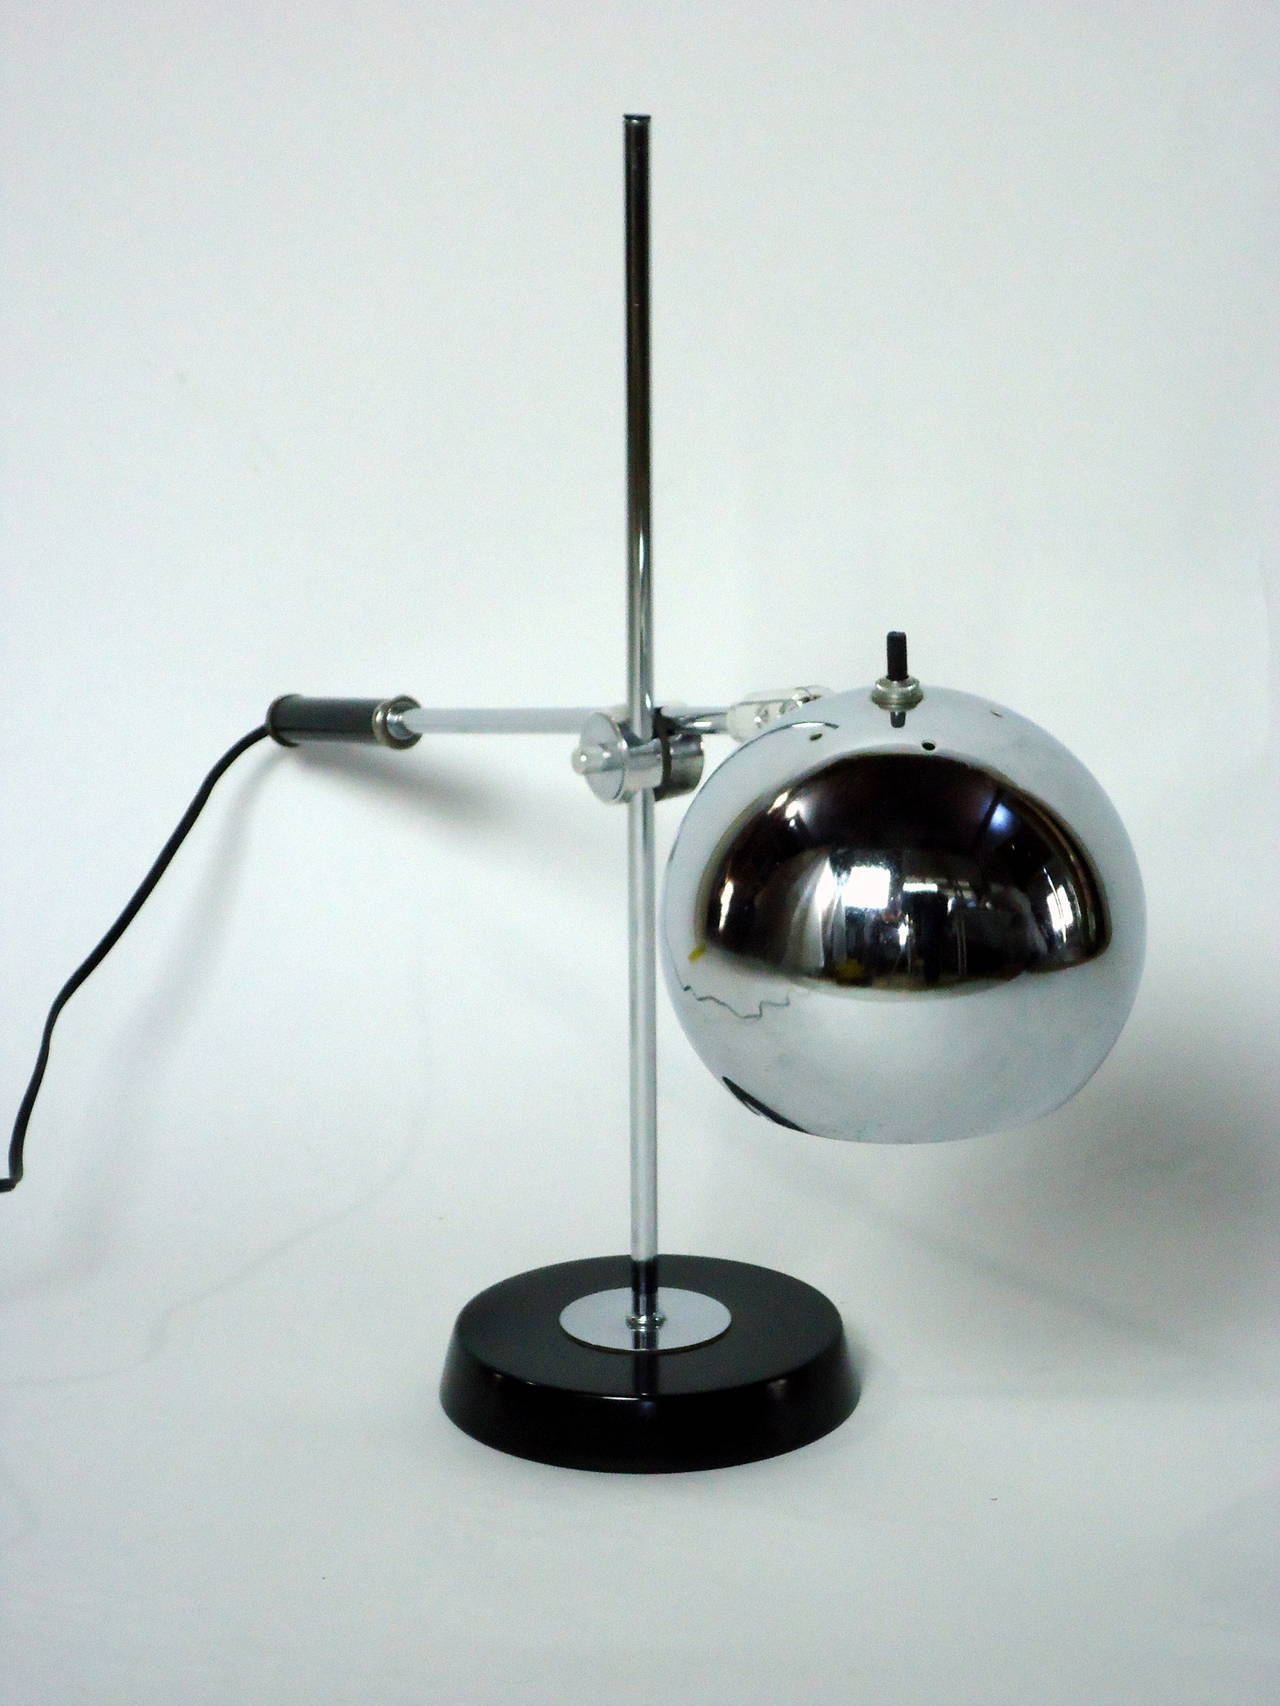 Adjustable chrome table or desk lamp by Robert Sonneman, circa 1965.

The lamp has been professionally rewired and is in excellent condition.